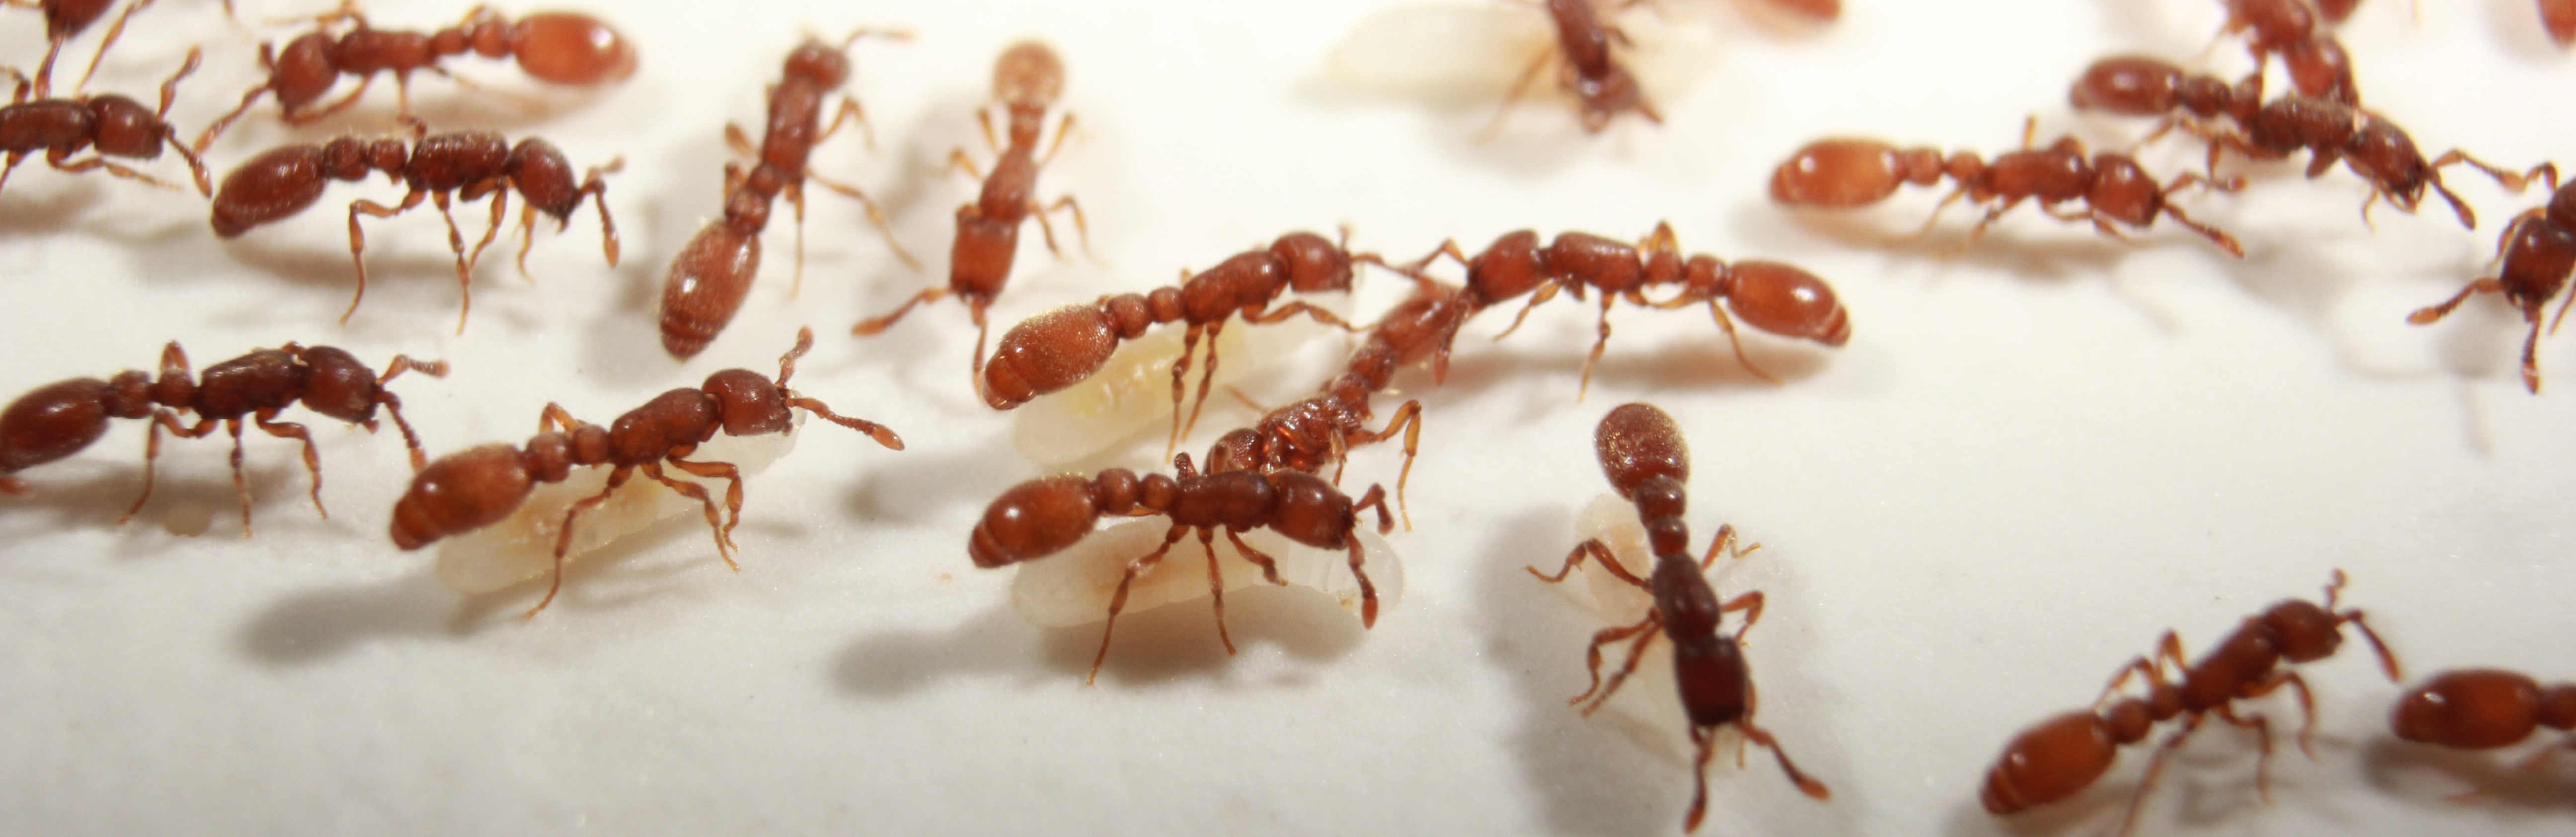 The Clonal Raider Ant and the Molecular Origins of Sociality